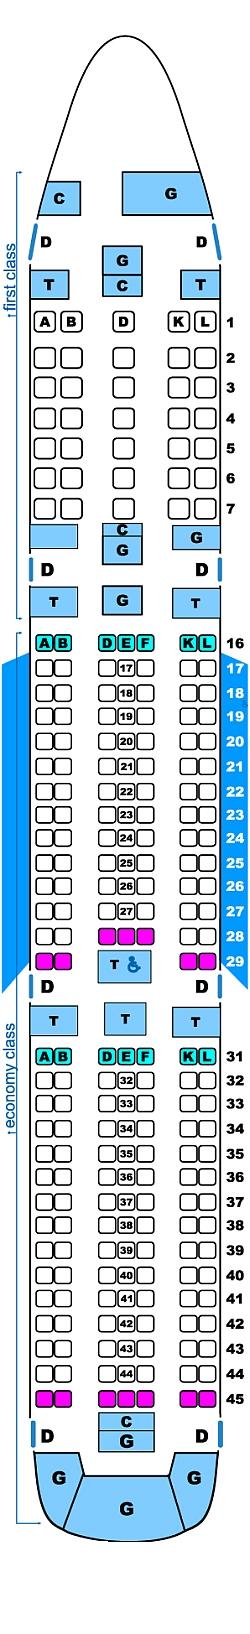 Seat map for Continental Airlines Boeing B767 400ER (35/200)